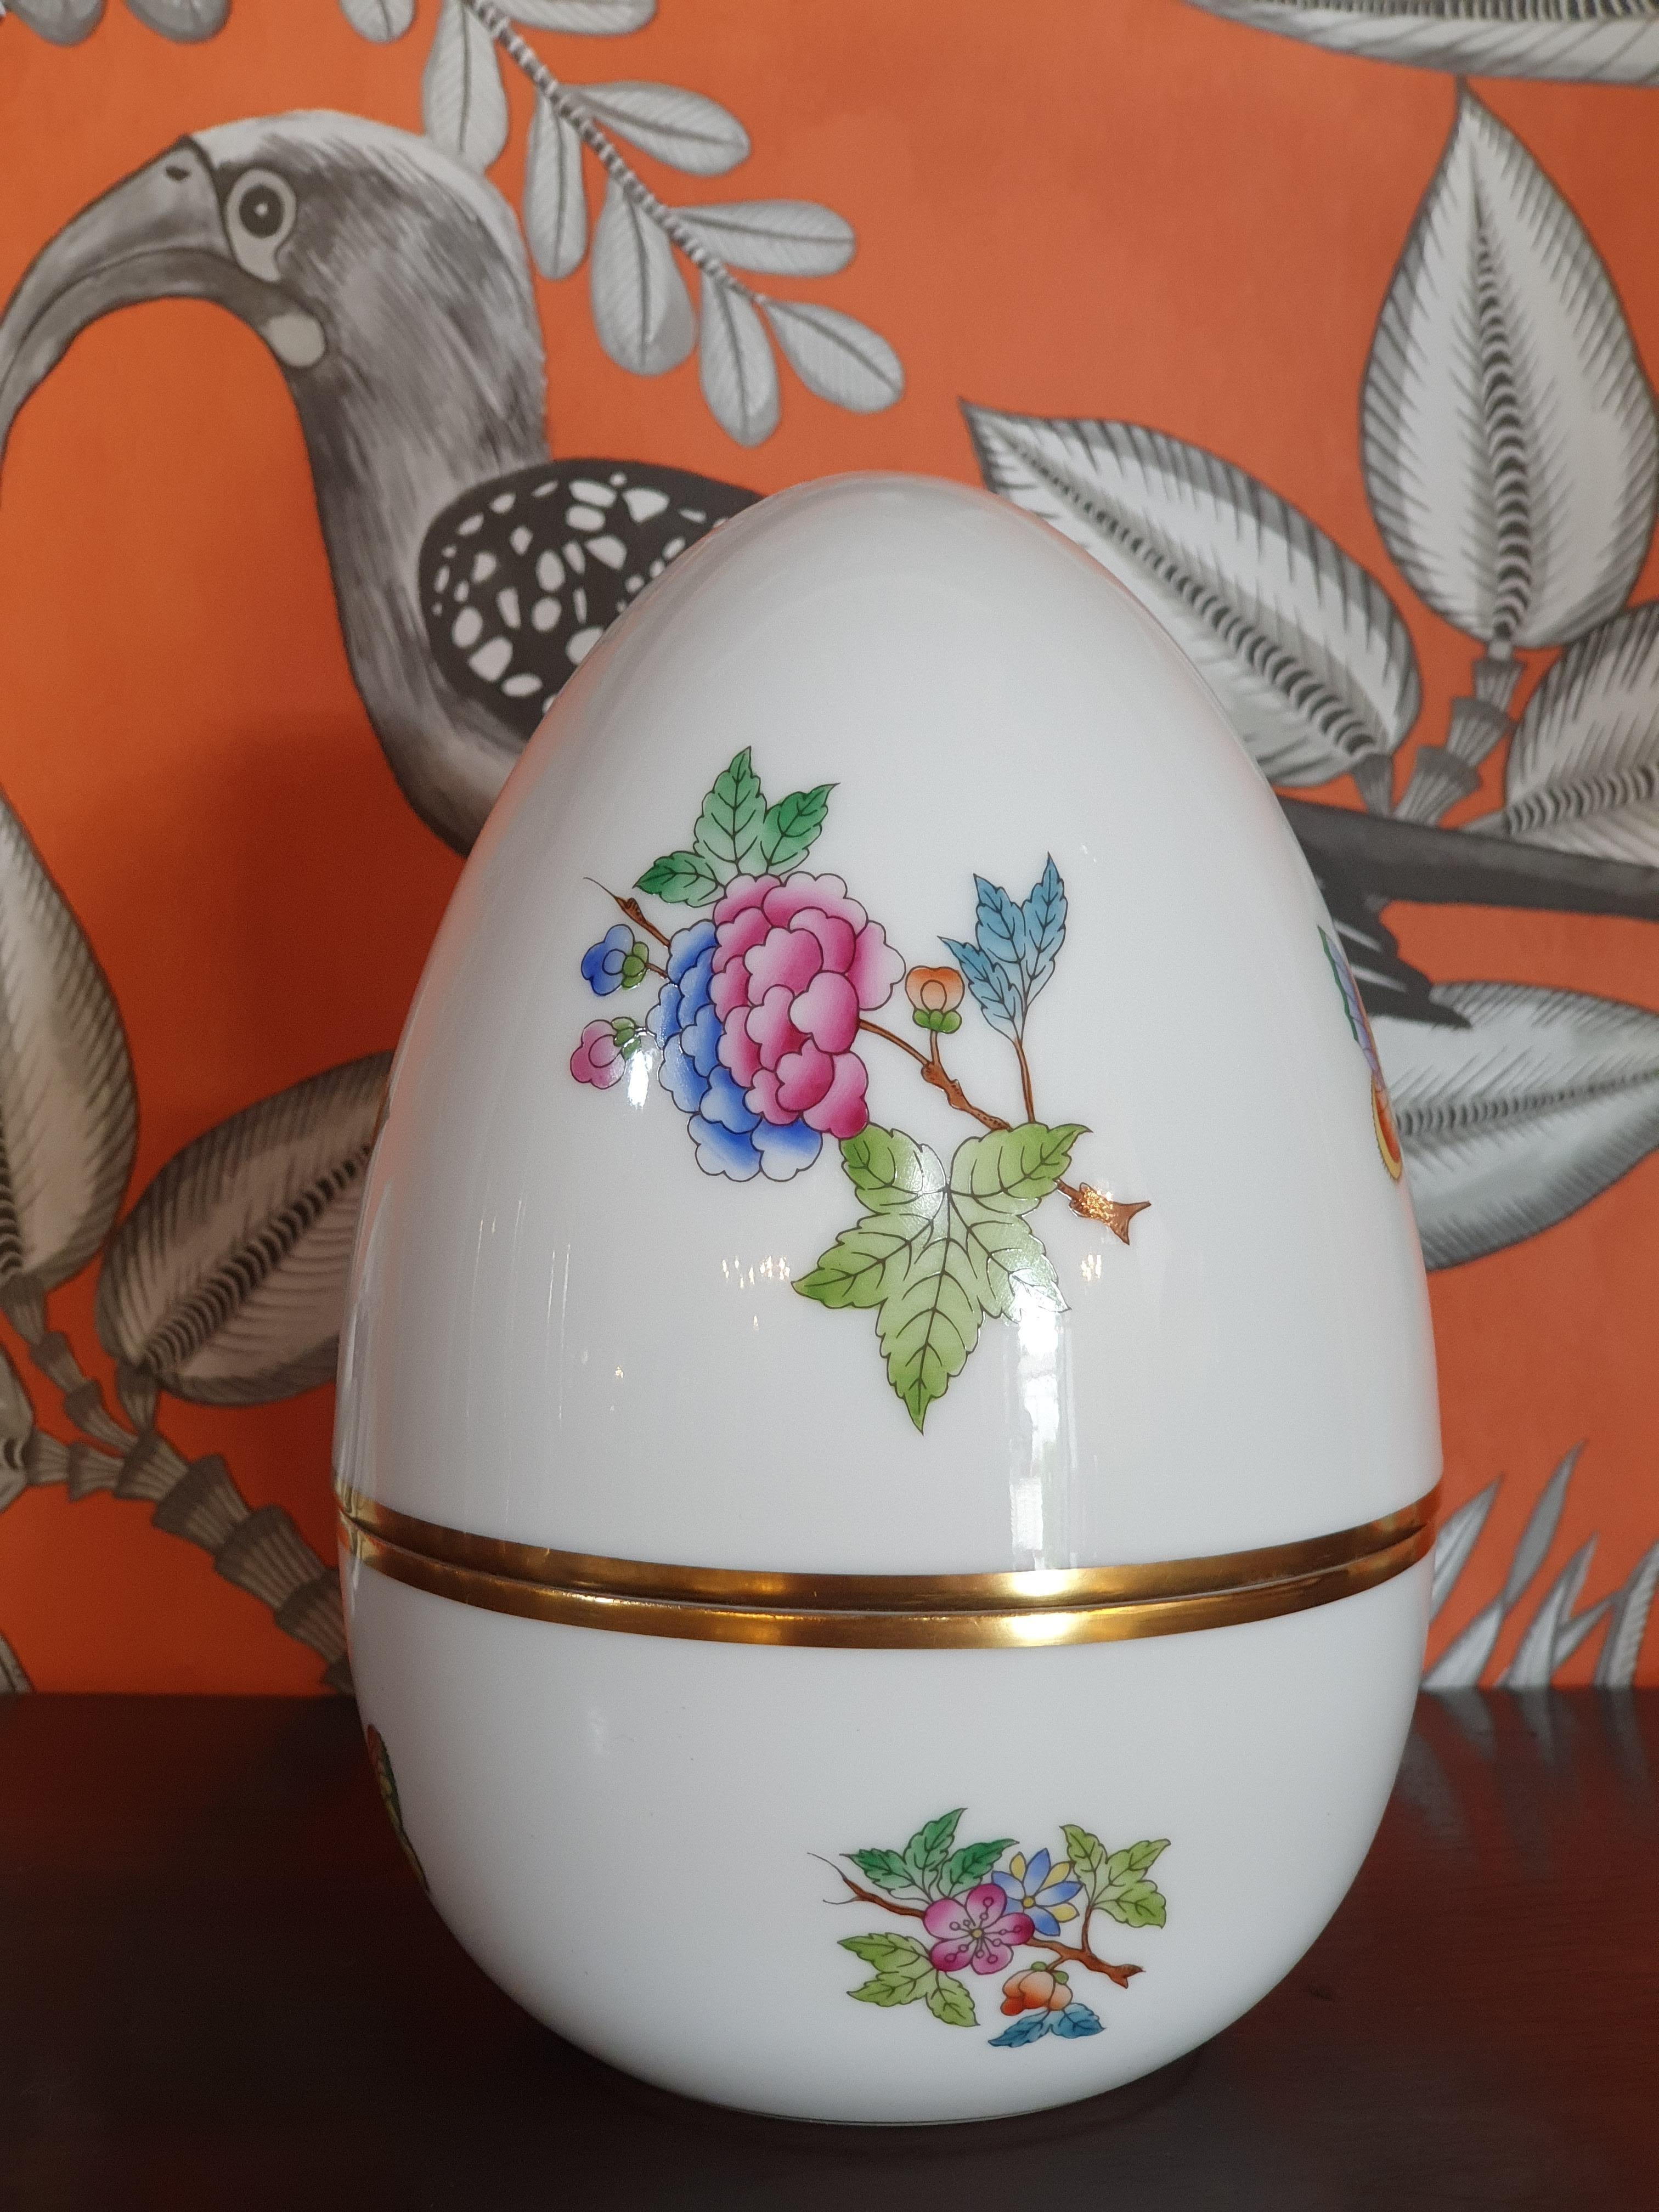 Stylish set of two egg shaped boxes in Hungarian hand painted porcelain.
The bigger in the Victoria decor, one of the most important of Herend since it was chosen by the great Queen Victoria in 1851 during the universal exhibition at the Crystal